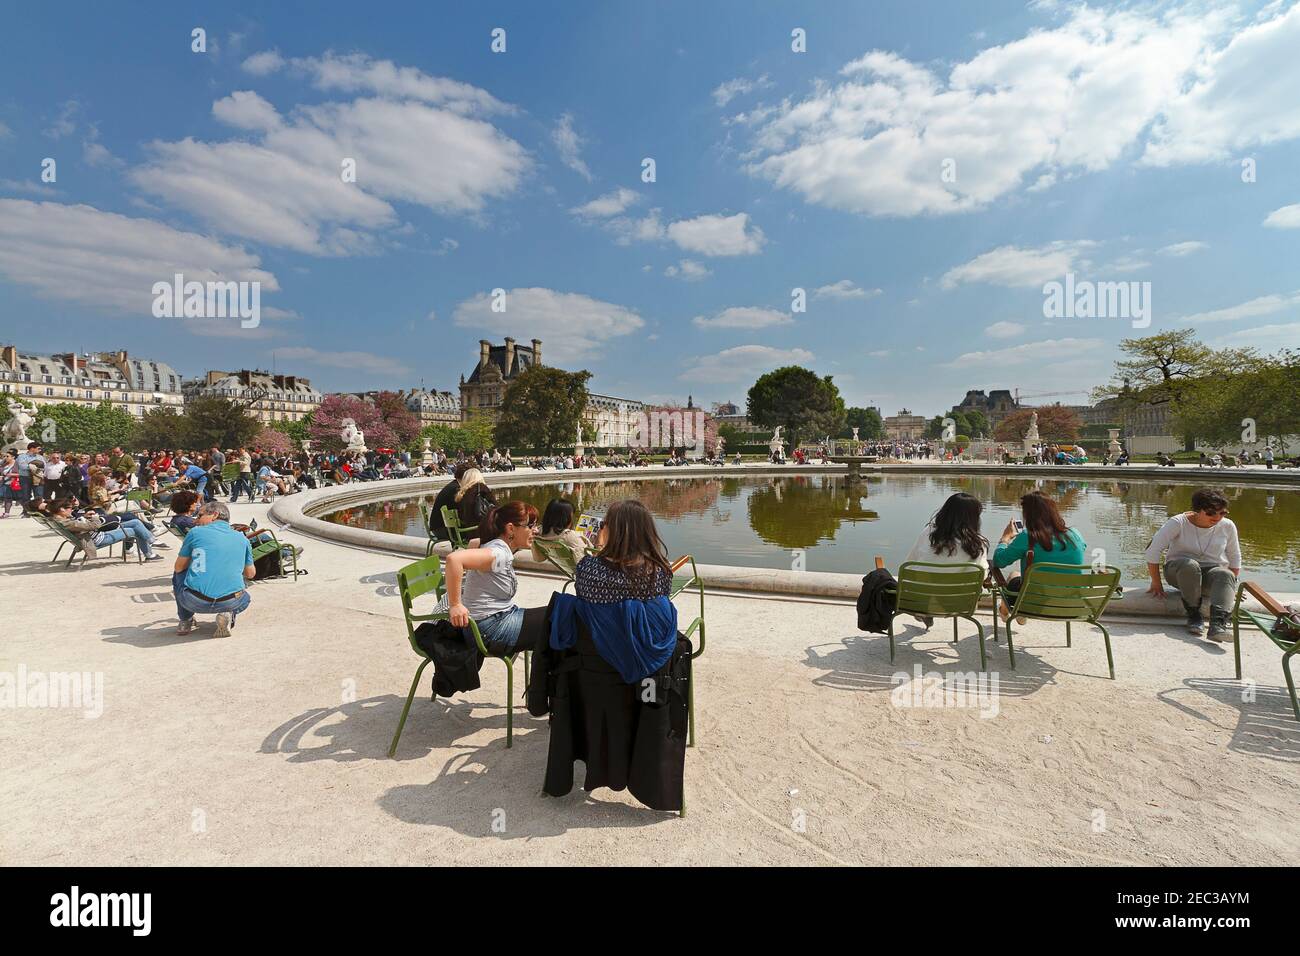 Jardin de Tuileries, Paris.  Tourists and Parisians relax in spring sun around one of the fountain pools in the formal gardens. Stock Photo